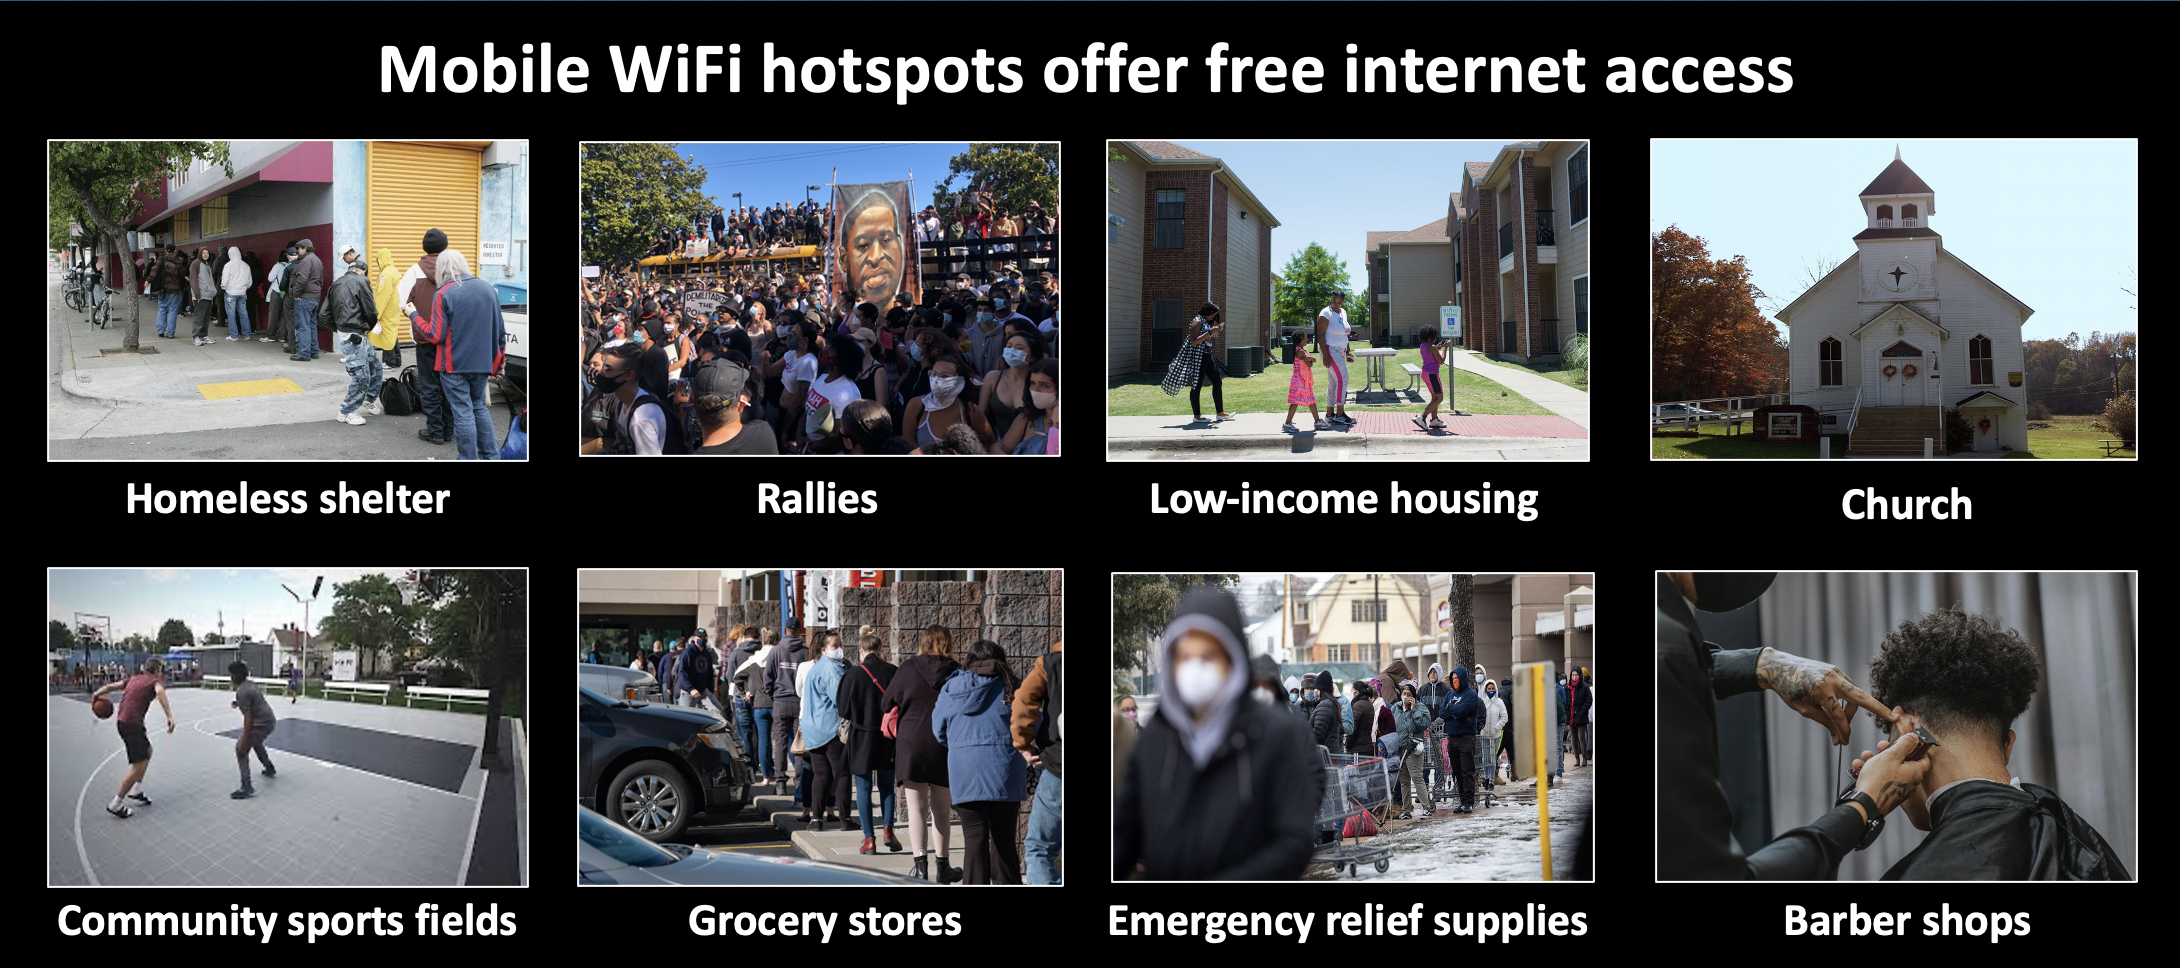 Mobile WiFi hotspots provide free internet access in low income communities and help build contact lists at the same time.